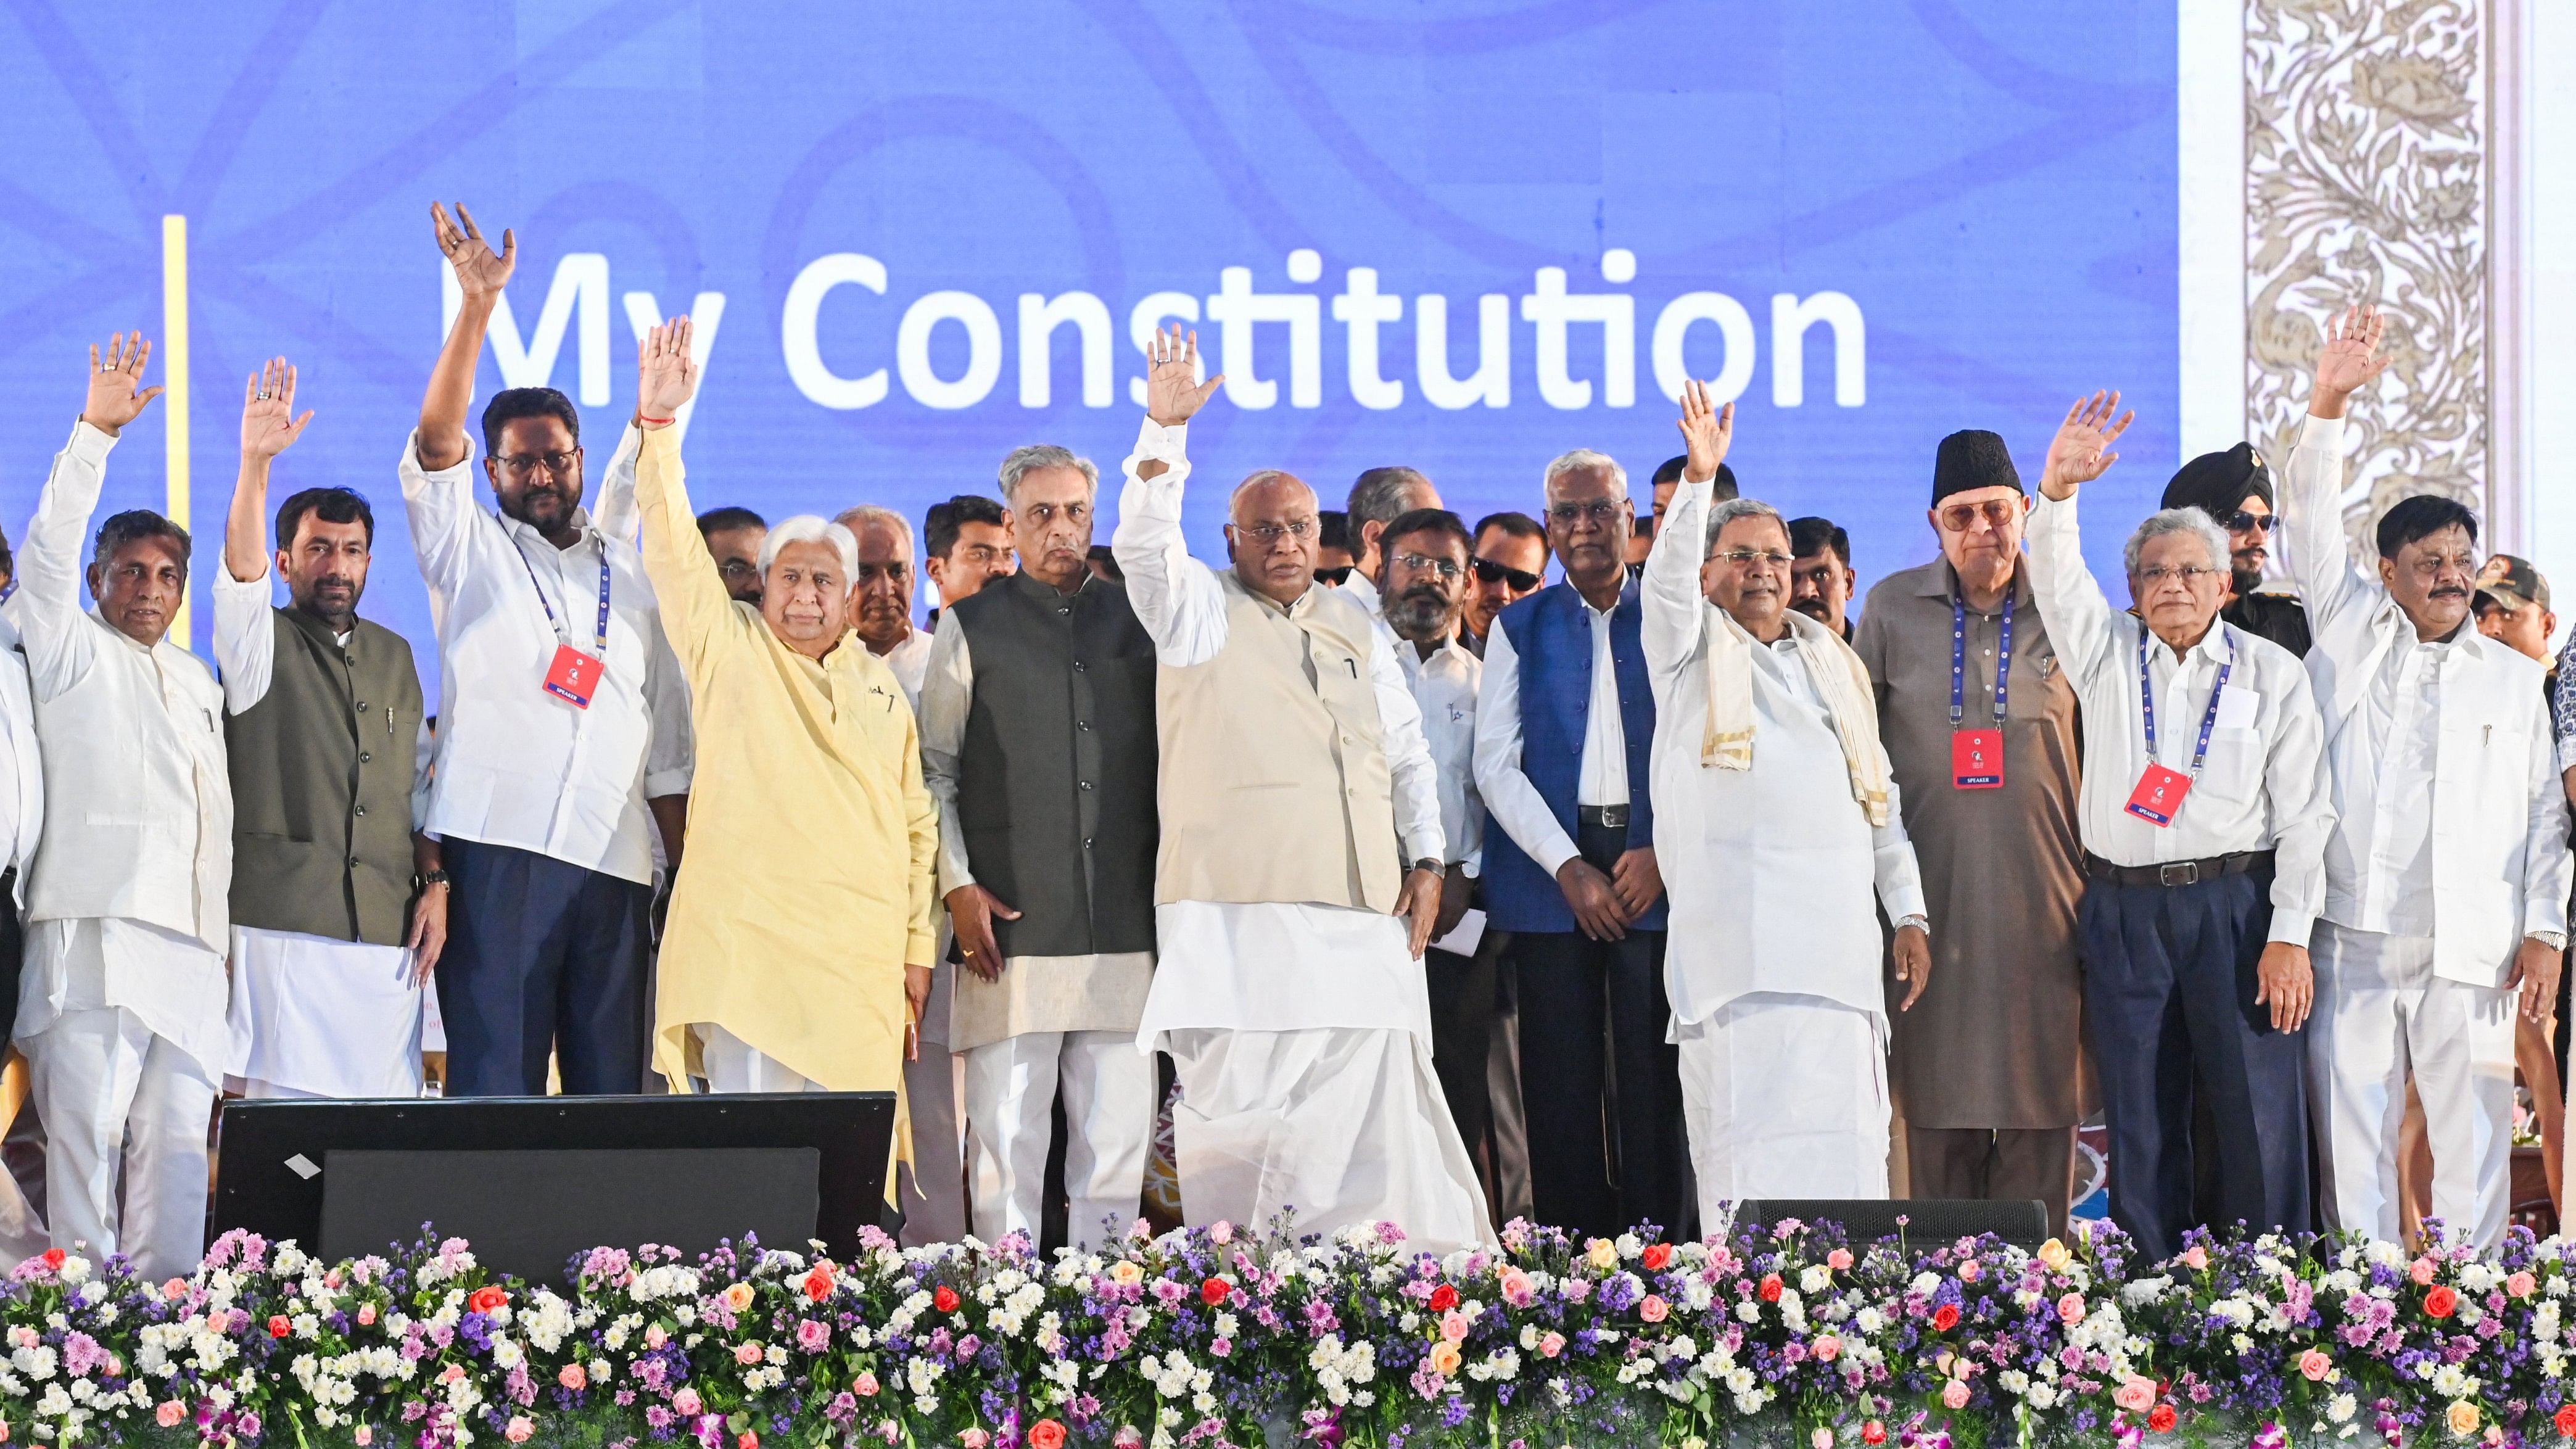 <div class="paragraphs"><p>Ministers K H Muniyappa, H K Patil, Legislative Council chairman Basavaraj Horatti, Congress president Mallikarjun Kharge, CPI leader D Raja, Chief Minister Siddaramaiah, National Conference leader Farooq Abdullah,&nbsp;CPM general secretary Sitaram Yechury, Minister H C Mahadevappa and others take part in the&nbsp;valedictory of the ‘Constitution and National Unity Convention’ in the city on Sunday. </p></div>